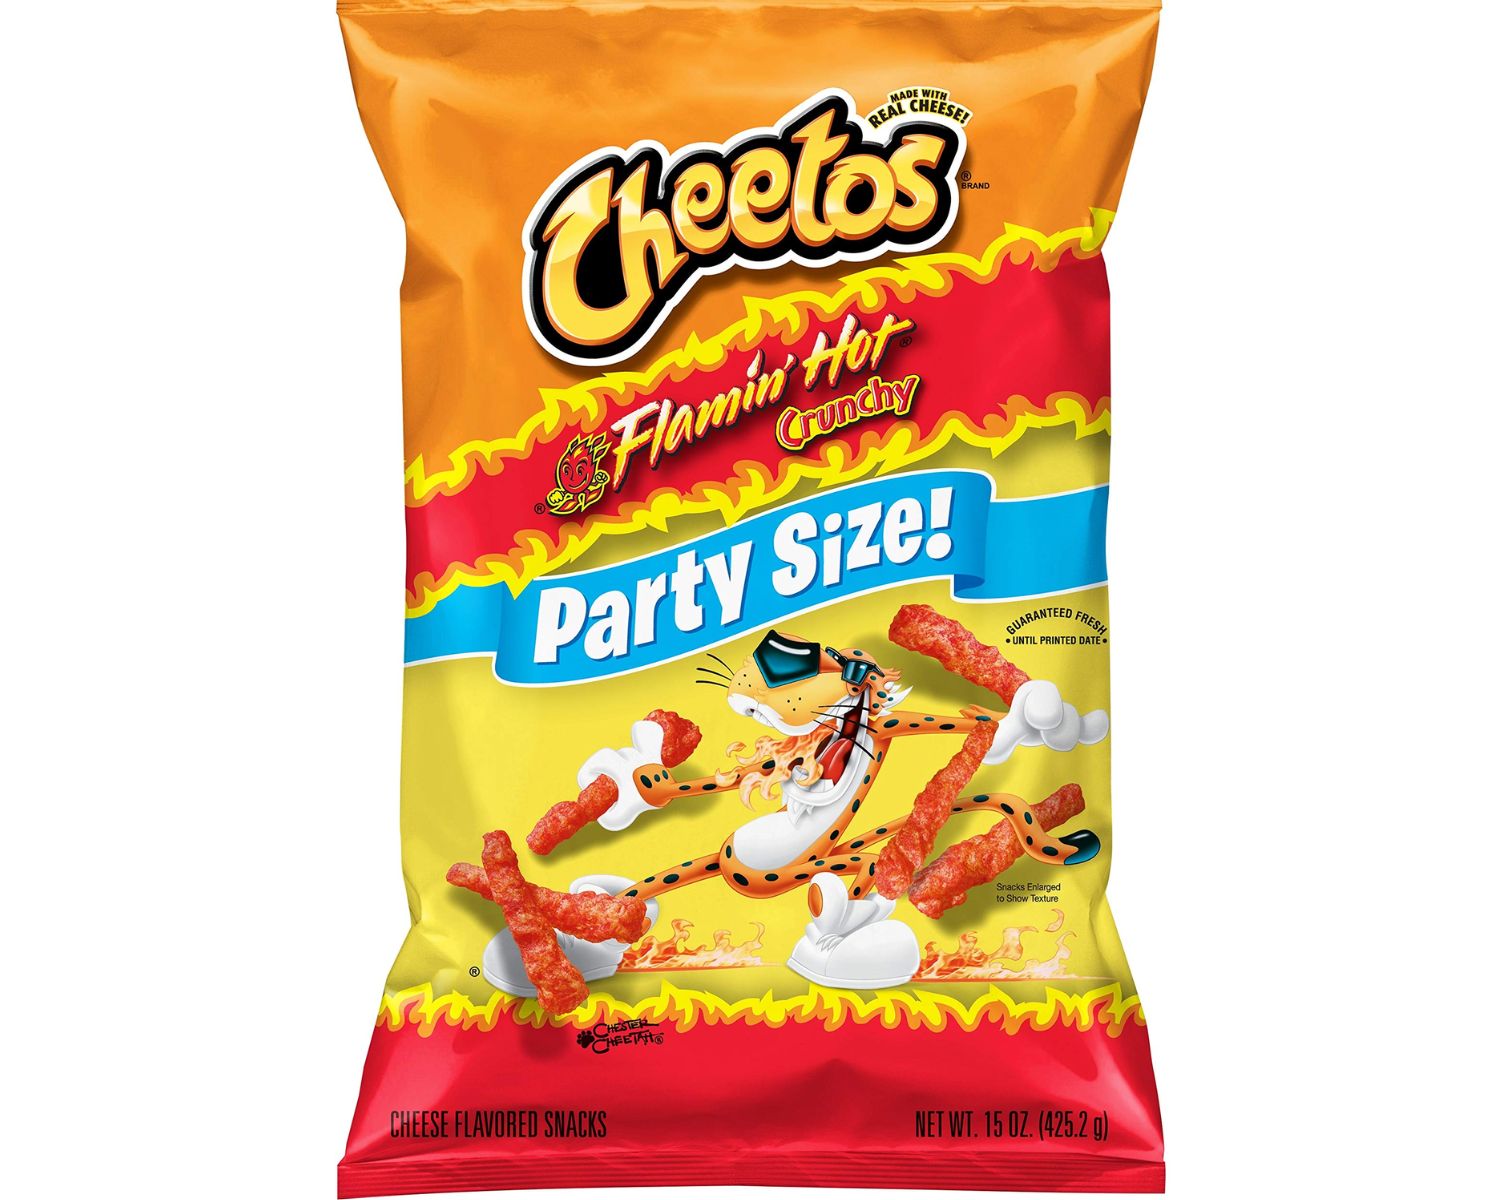 11-hot-cheeto-nutrition-facts